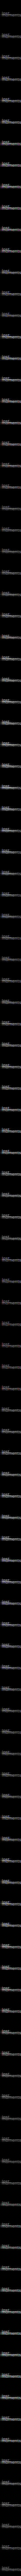 lost.moments collection image